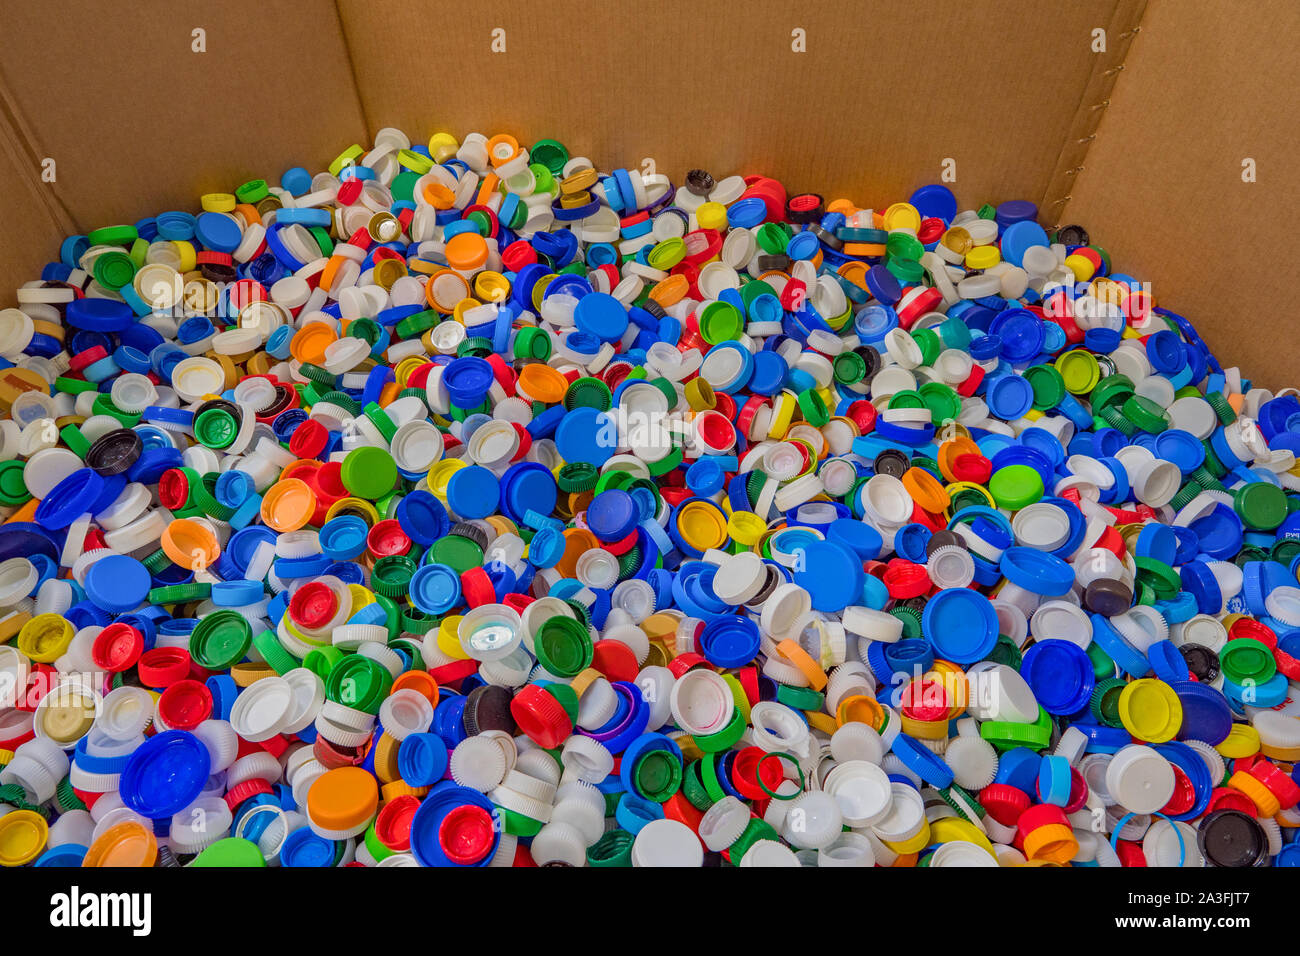 Plastic recycle. Sorting garbage. Waste recycling. Waste recycling plant. Colorful plastic bottle caps background. Colorful background of bottle caps. Recyclable waste concept. Material for processing Stock Photo